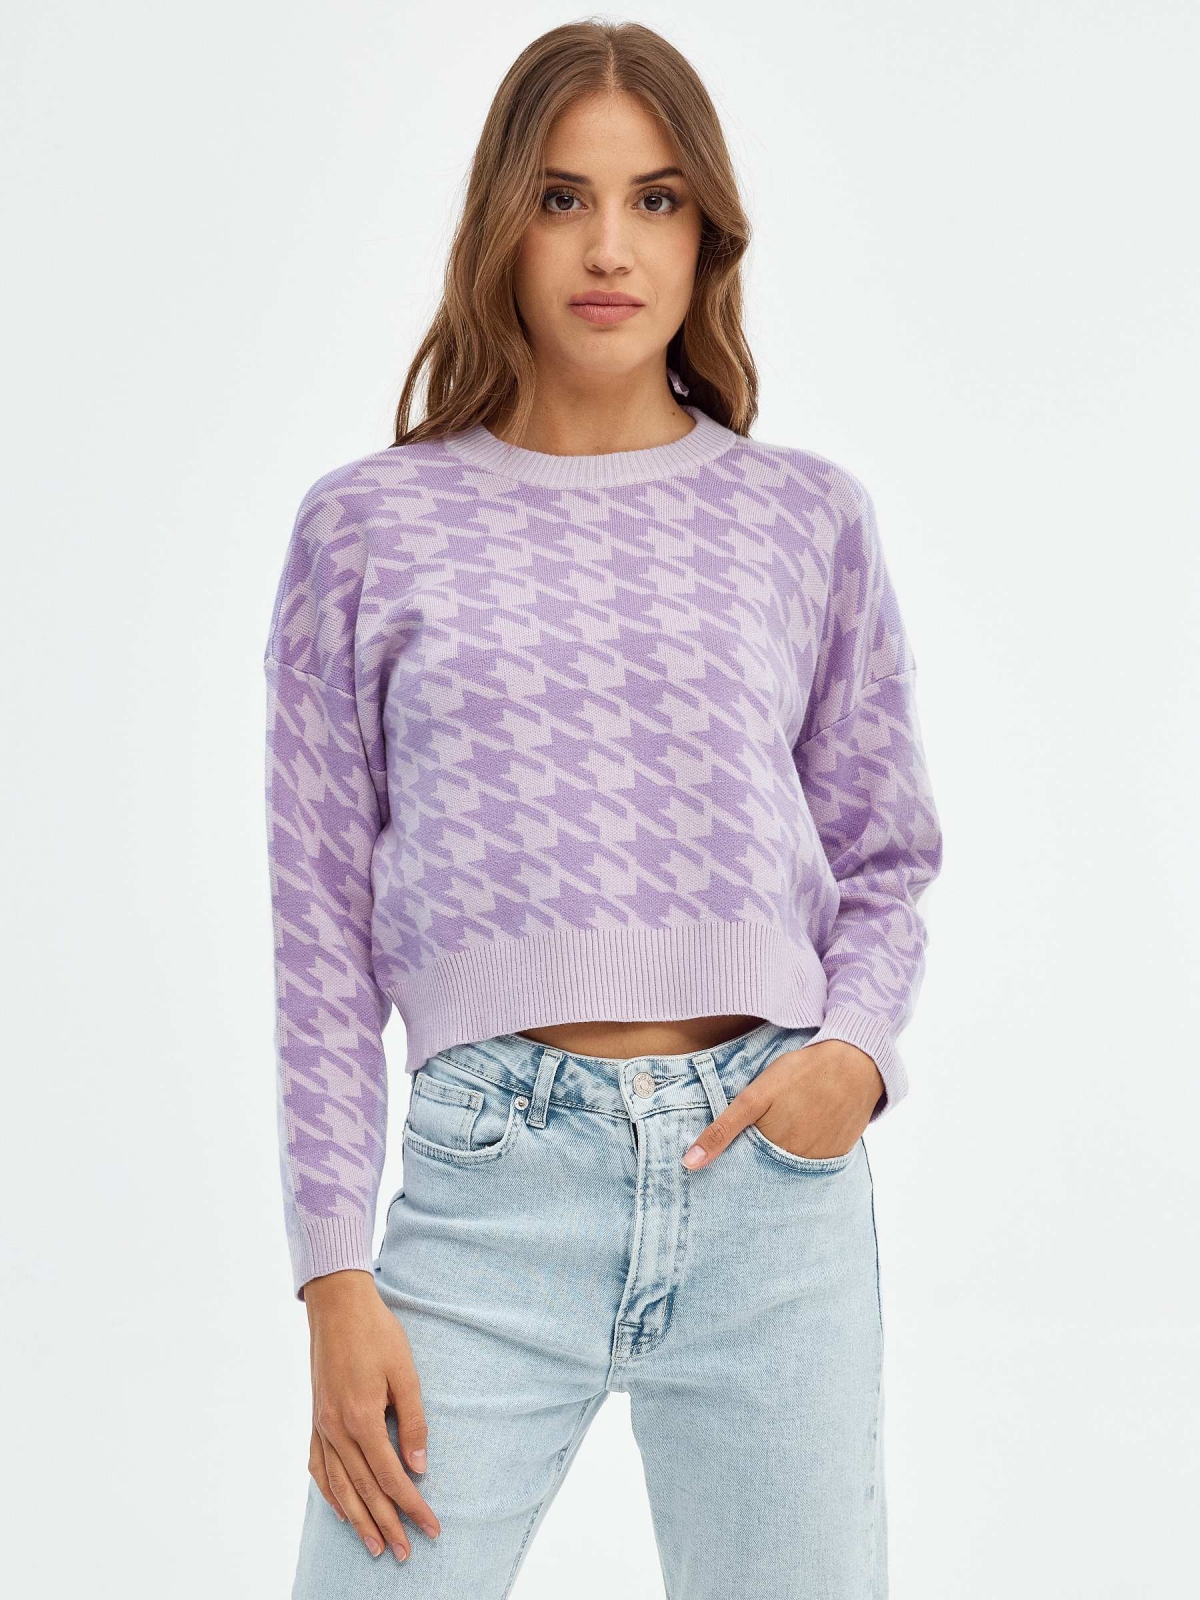 Houndstooth jacquard jumper mauve middle front view